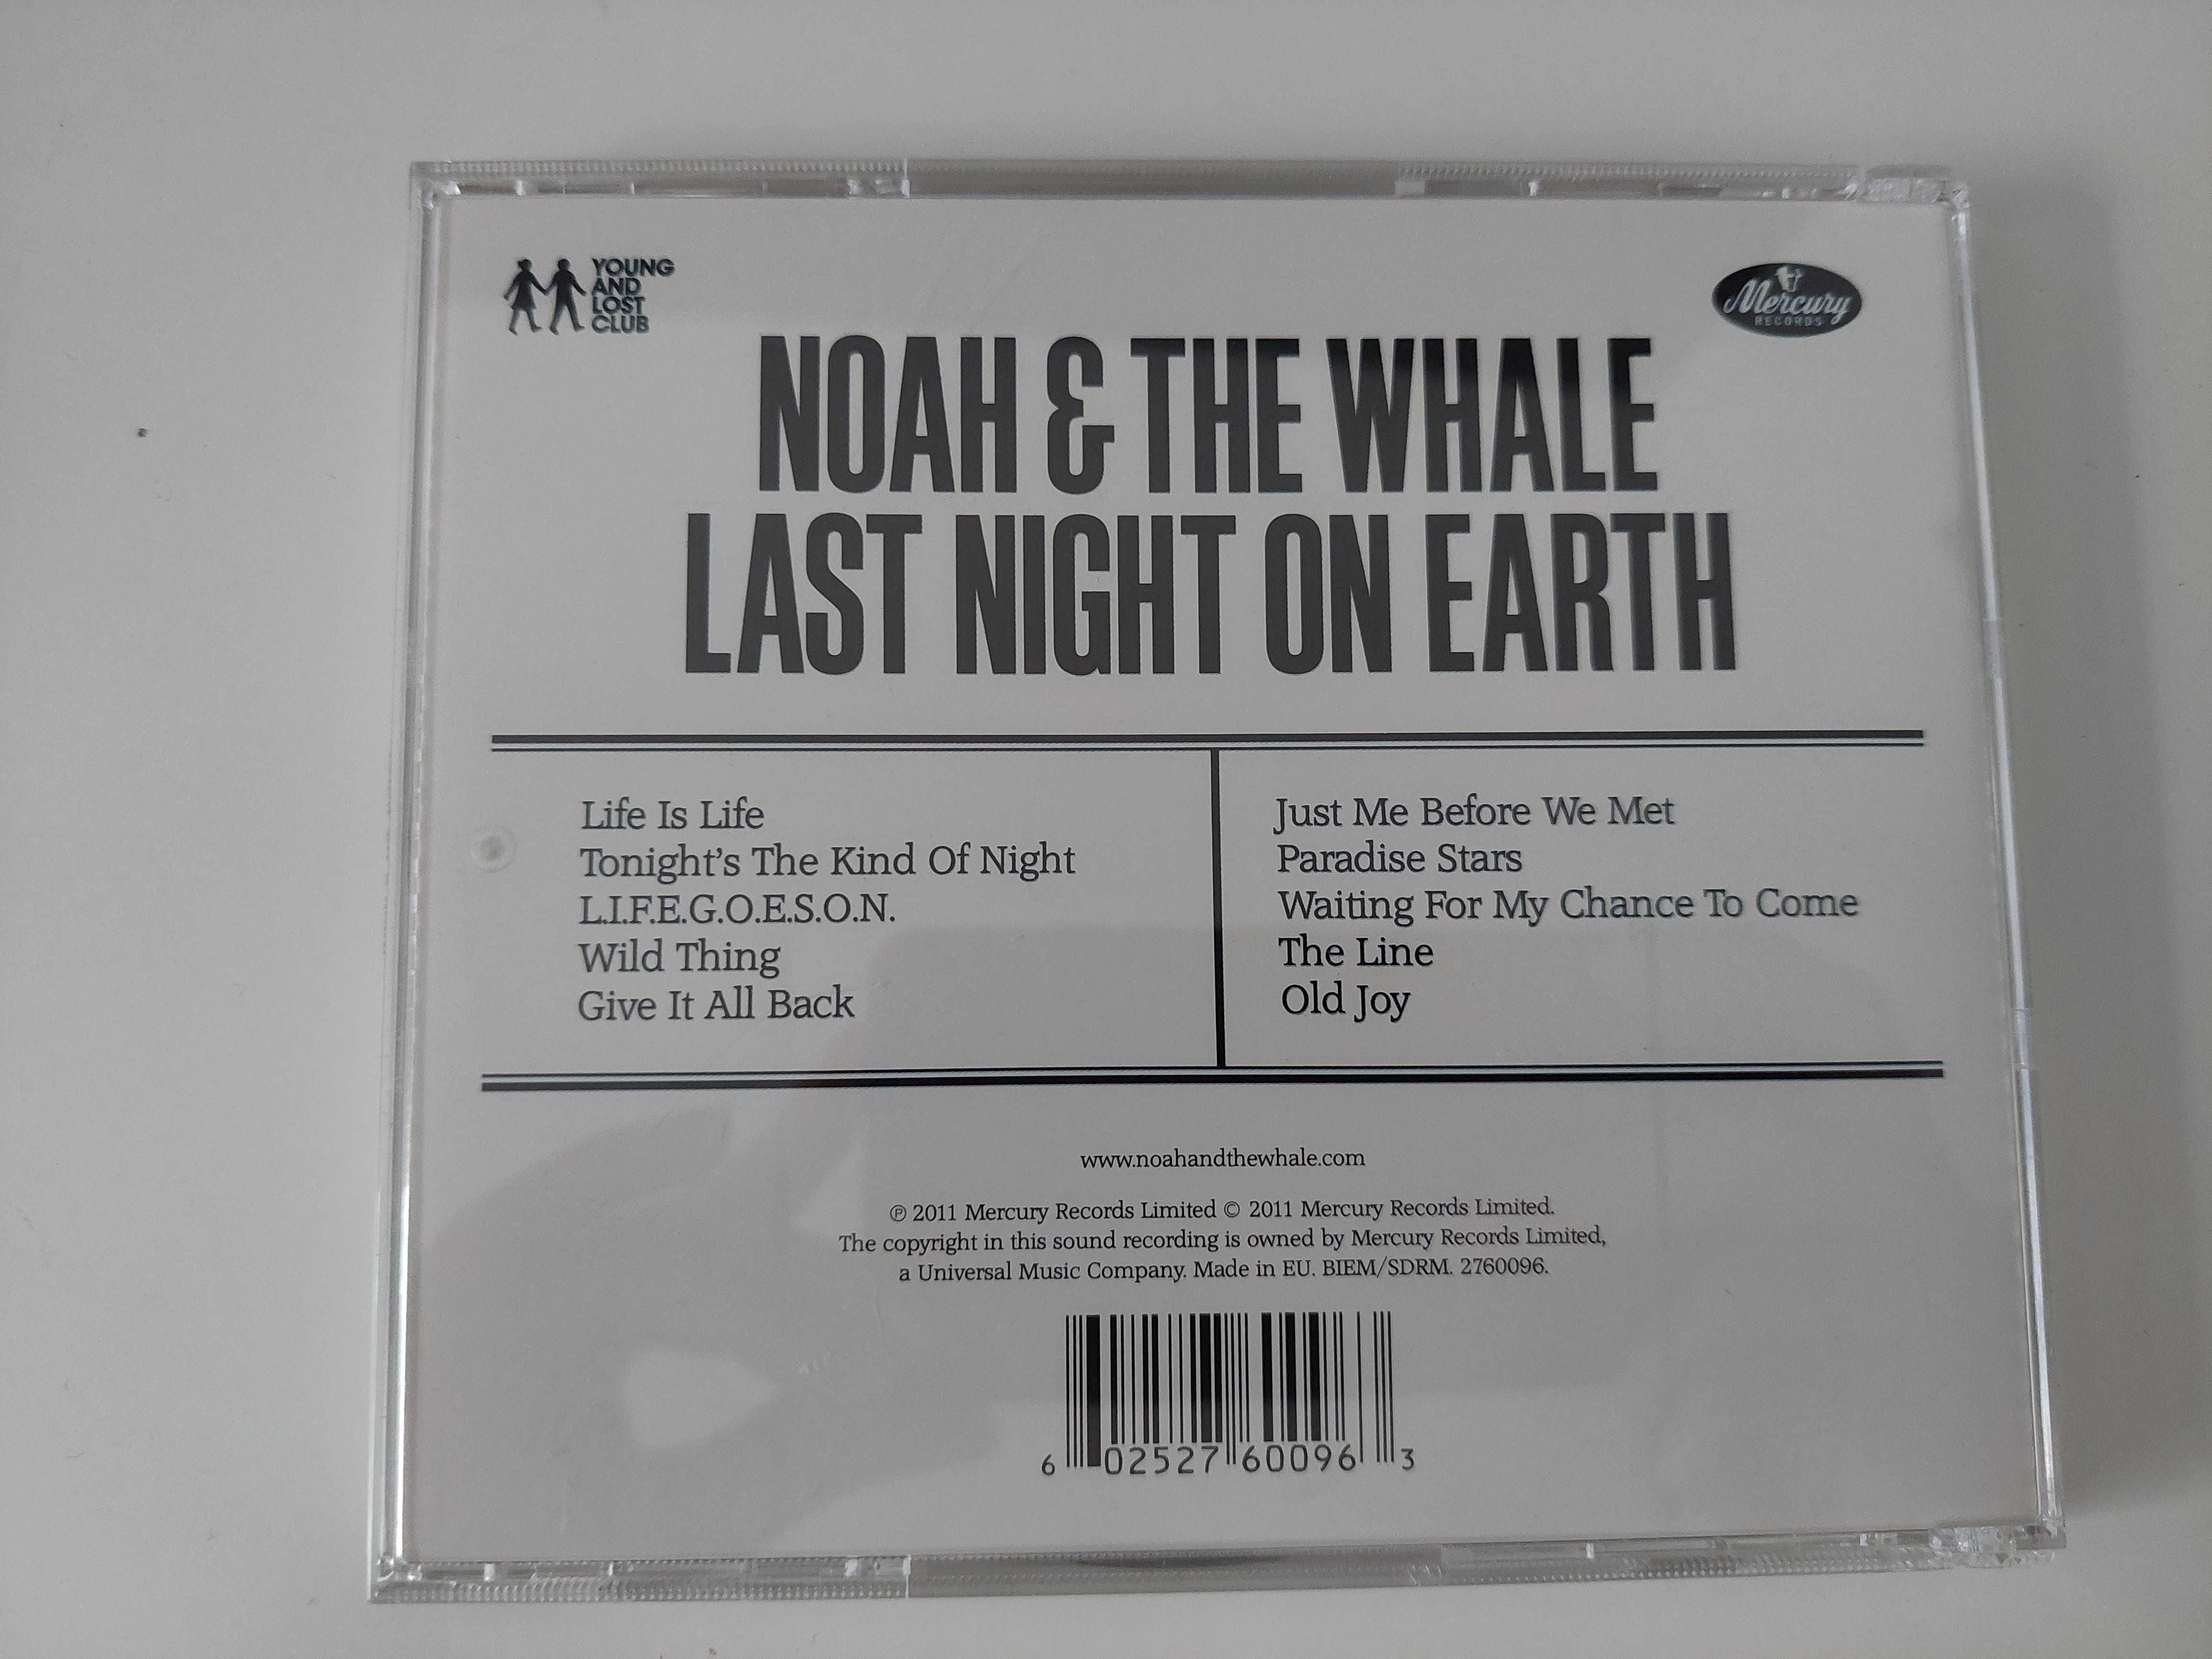 Noah and the Whale - Last Night on Earth CD